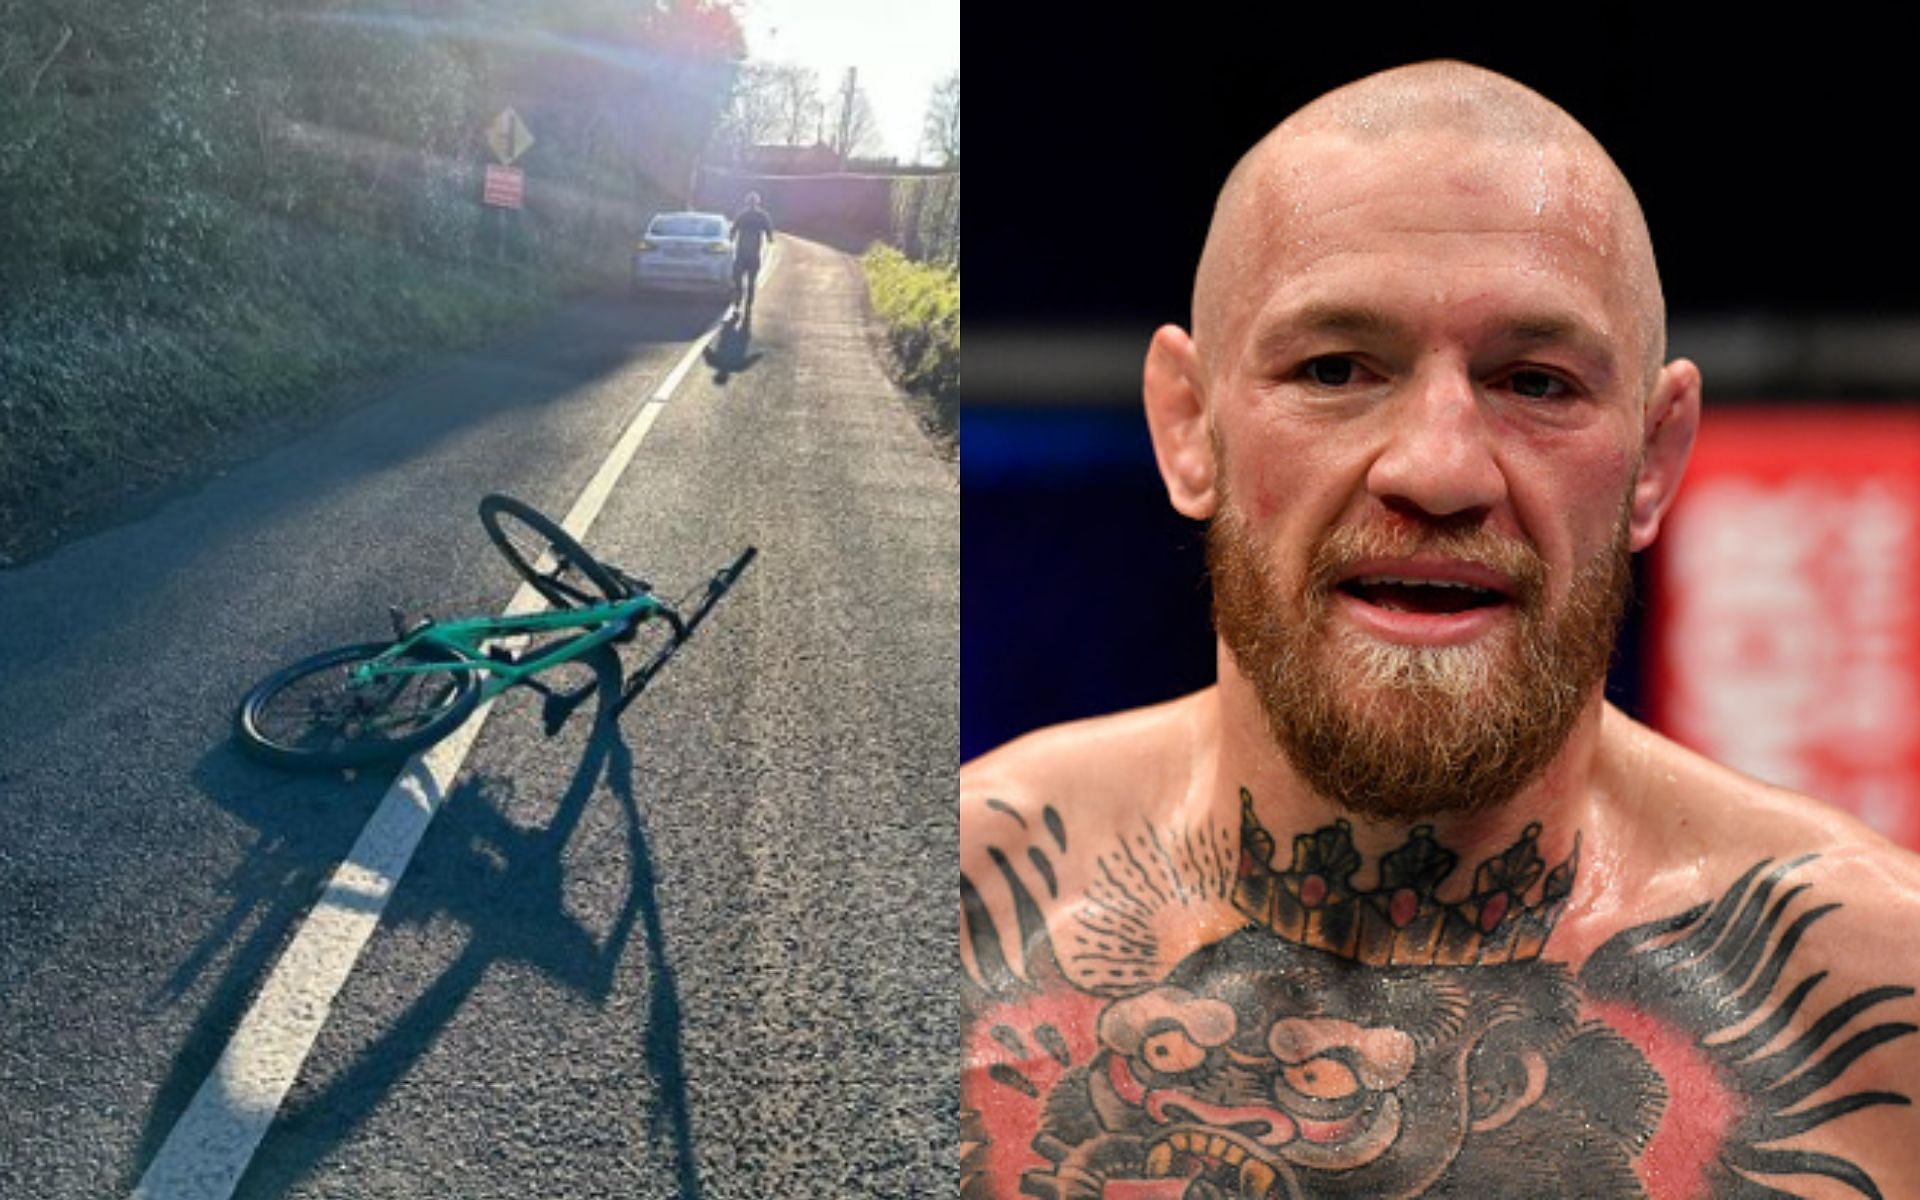 Left image credit: @thenotoriousmma on Instagram. Right image credit: Getty Images